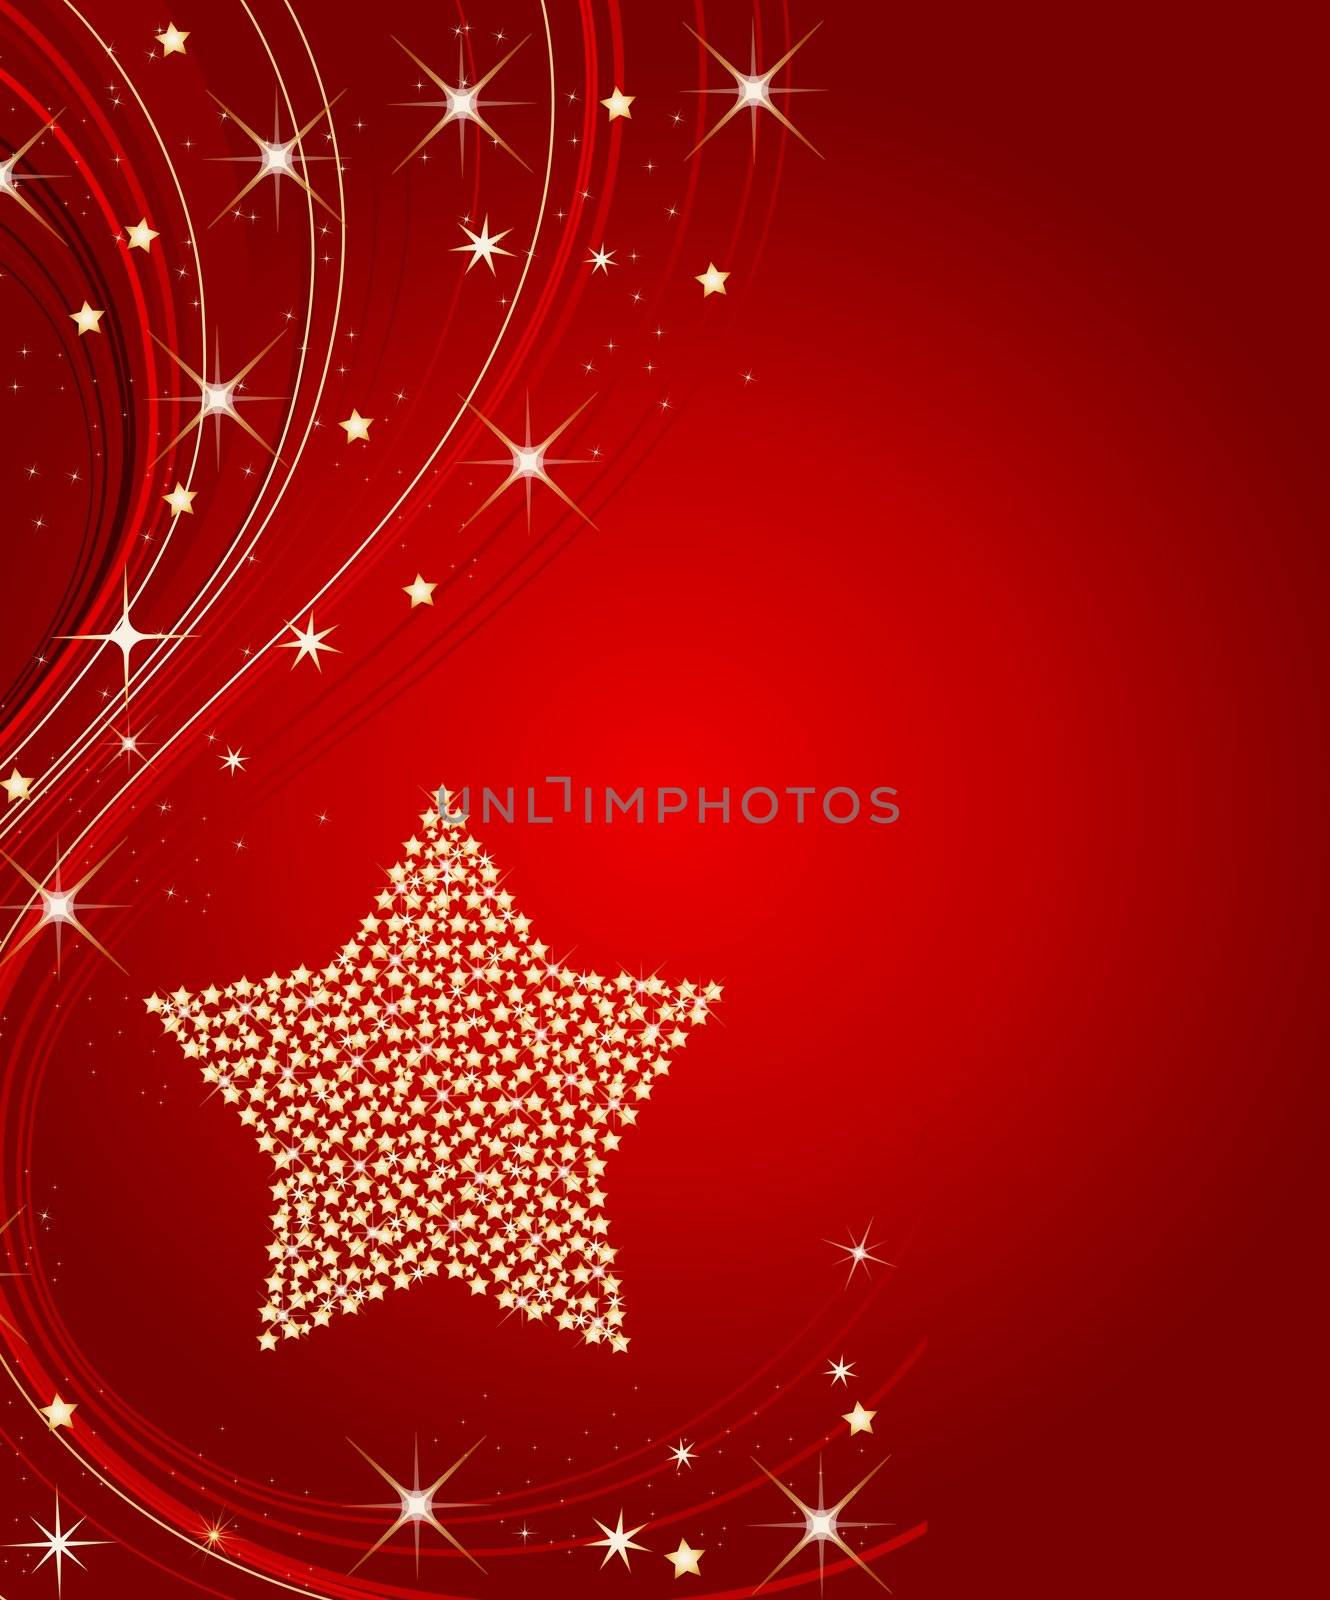 christmasframe with stars by peromarketing